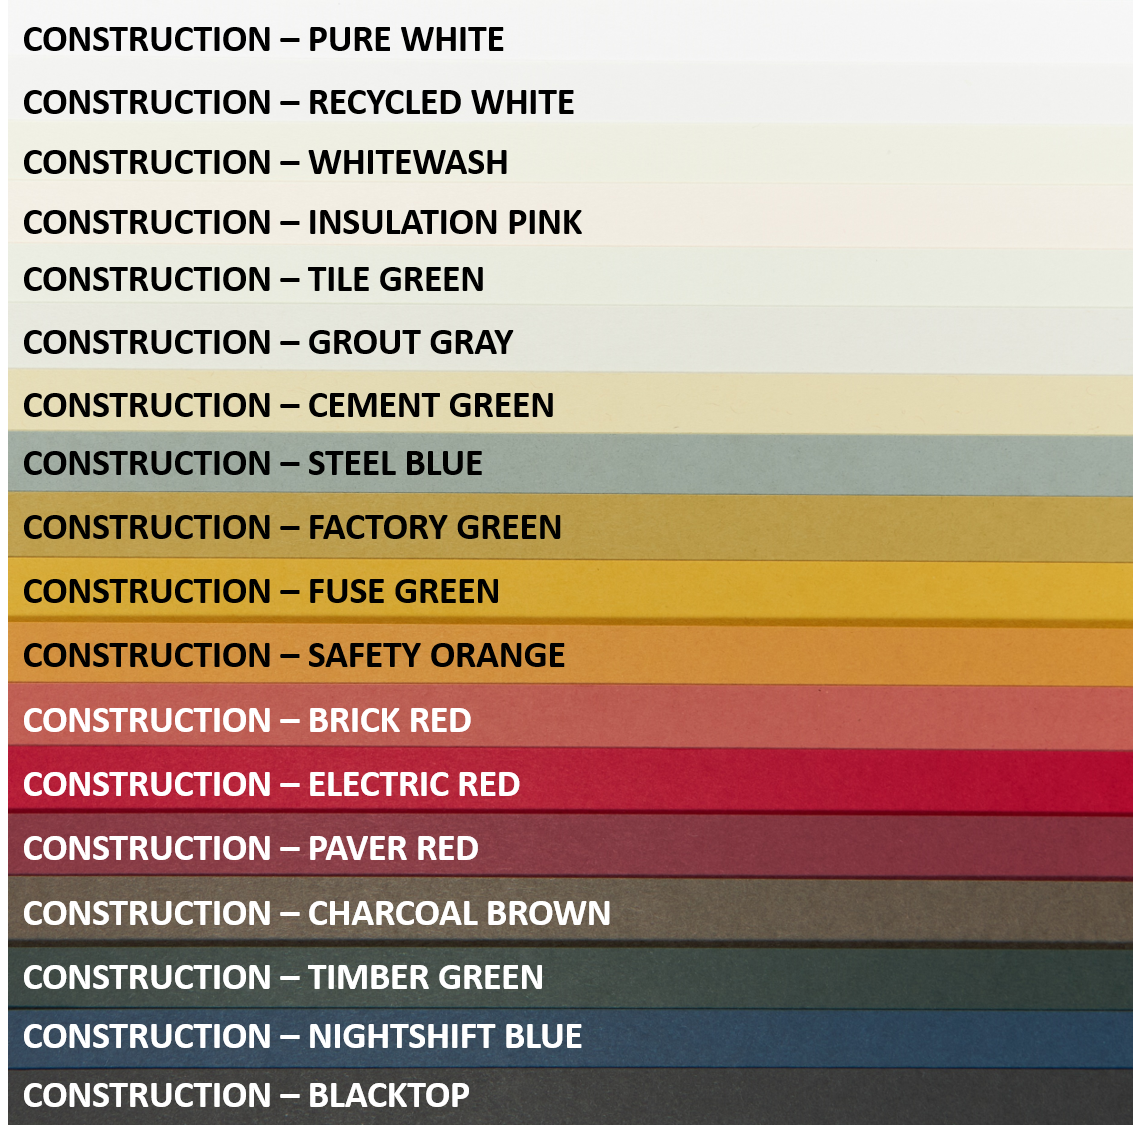 Whitewash Paper (Construction, Text Weight)